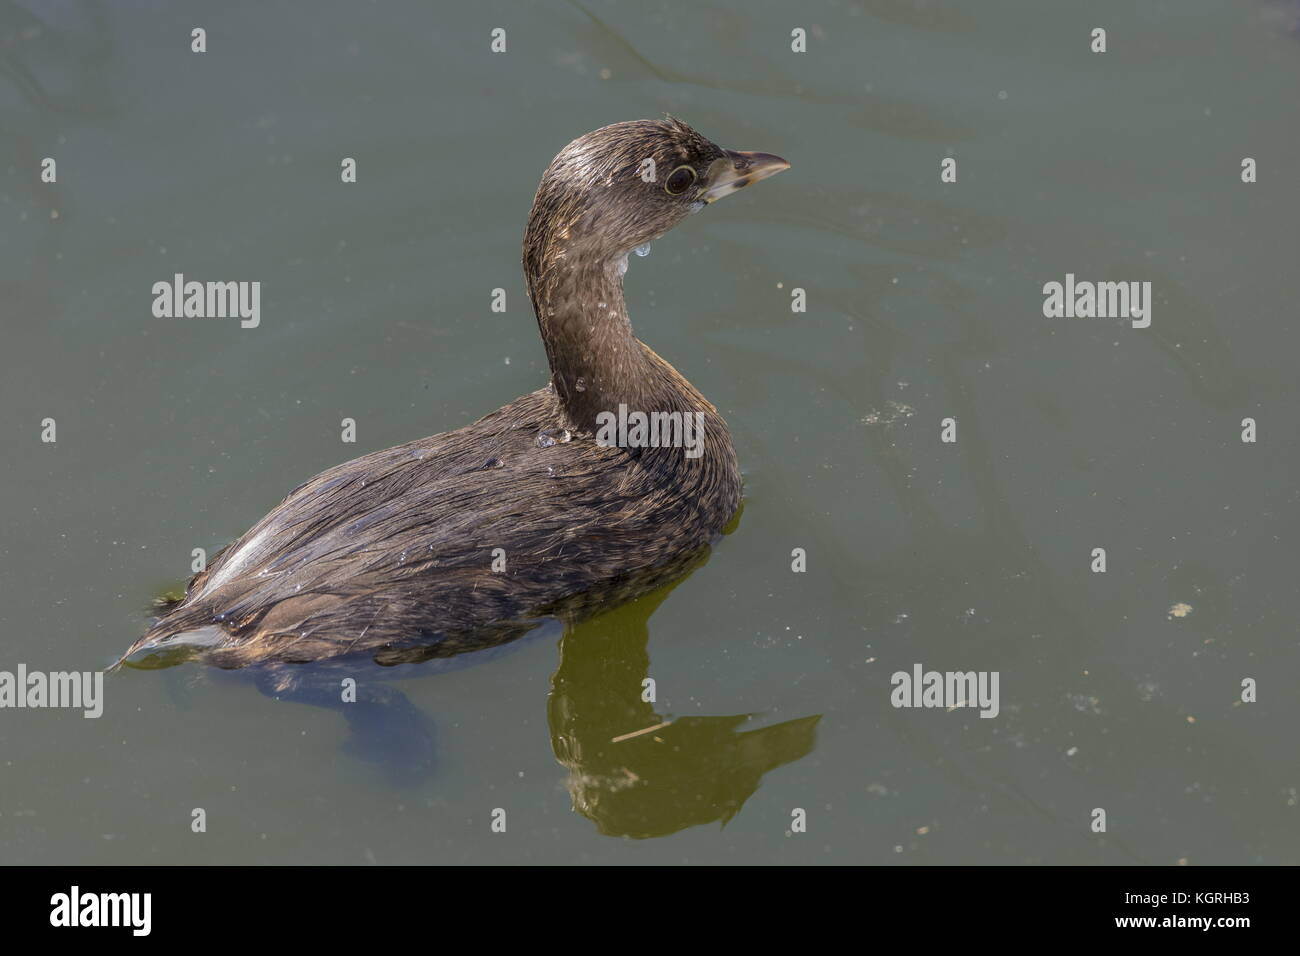 Pied-billed grebe, Podilymbus podiceps, on water surface after diving. Florida, winter. Stock Photo